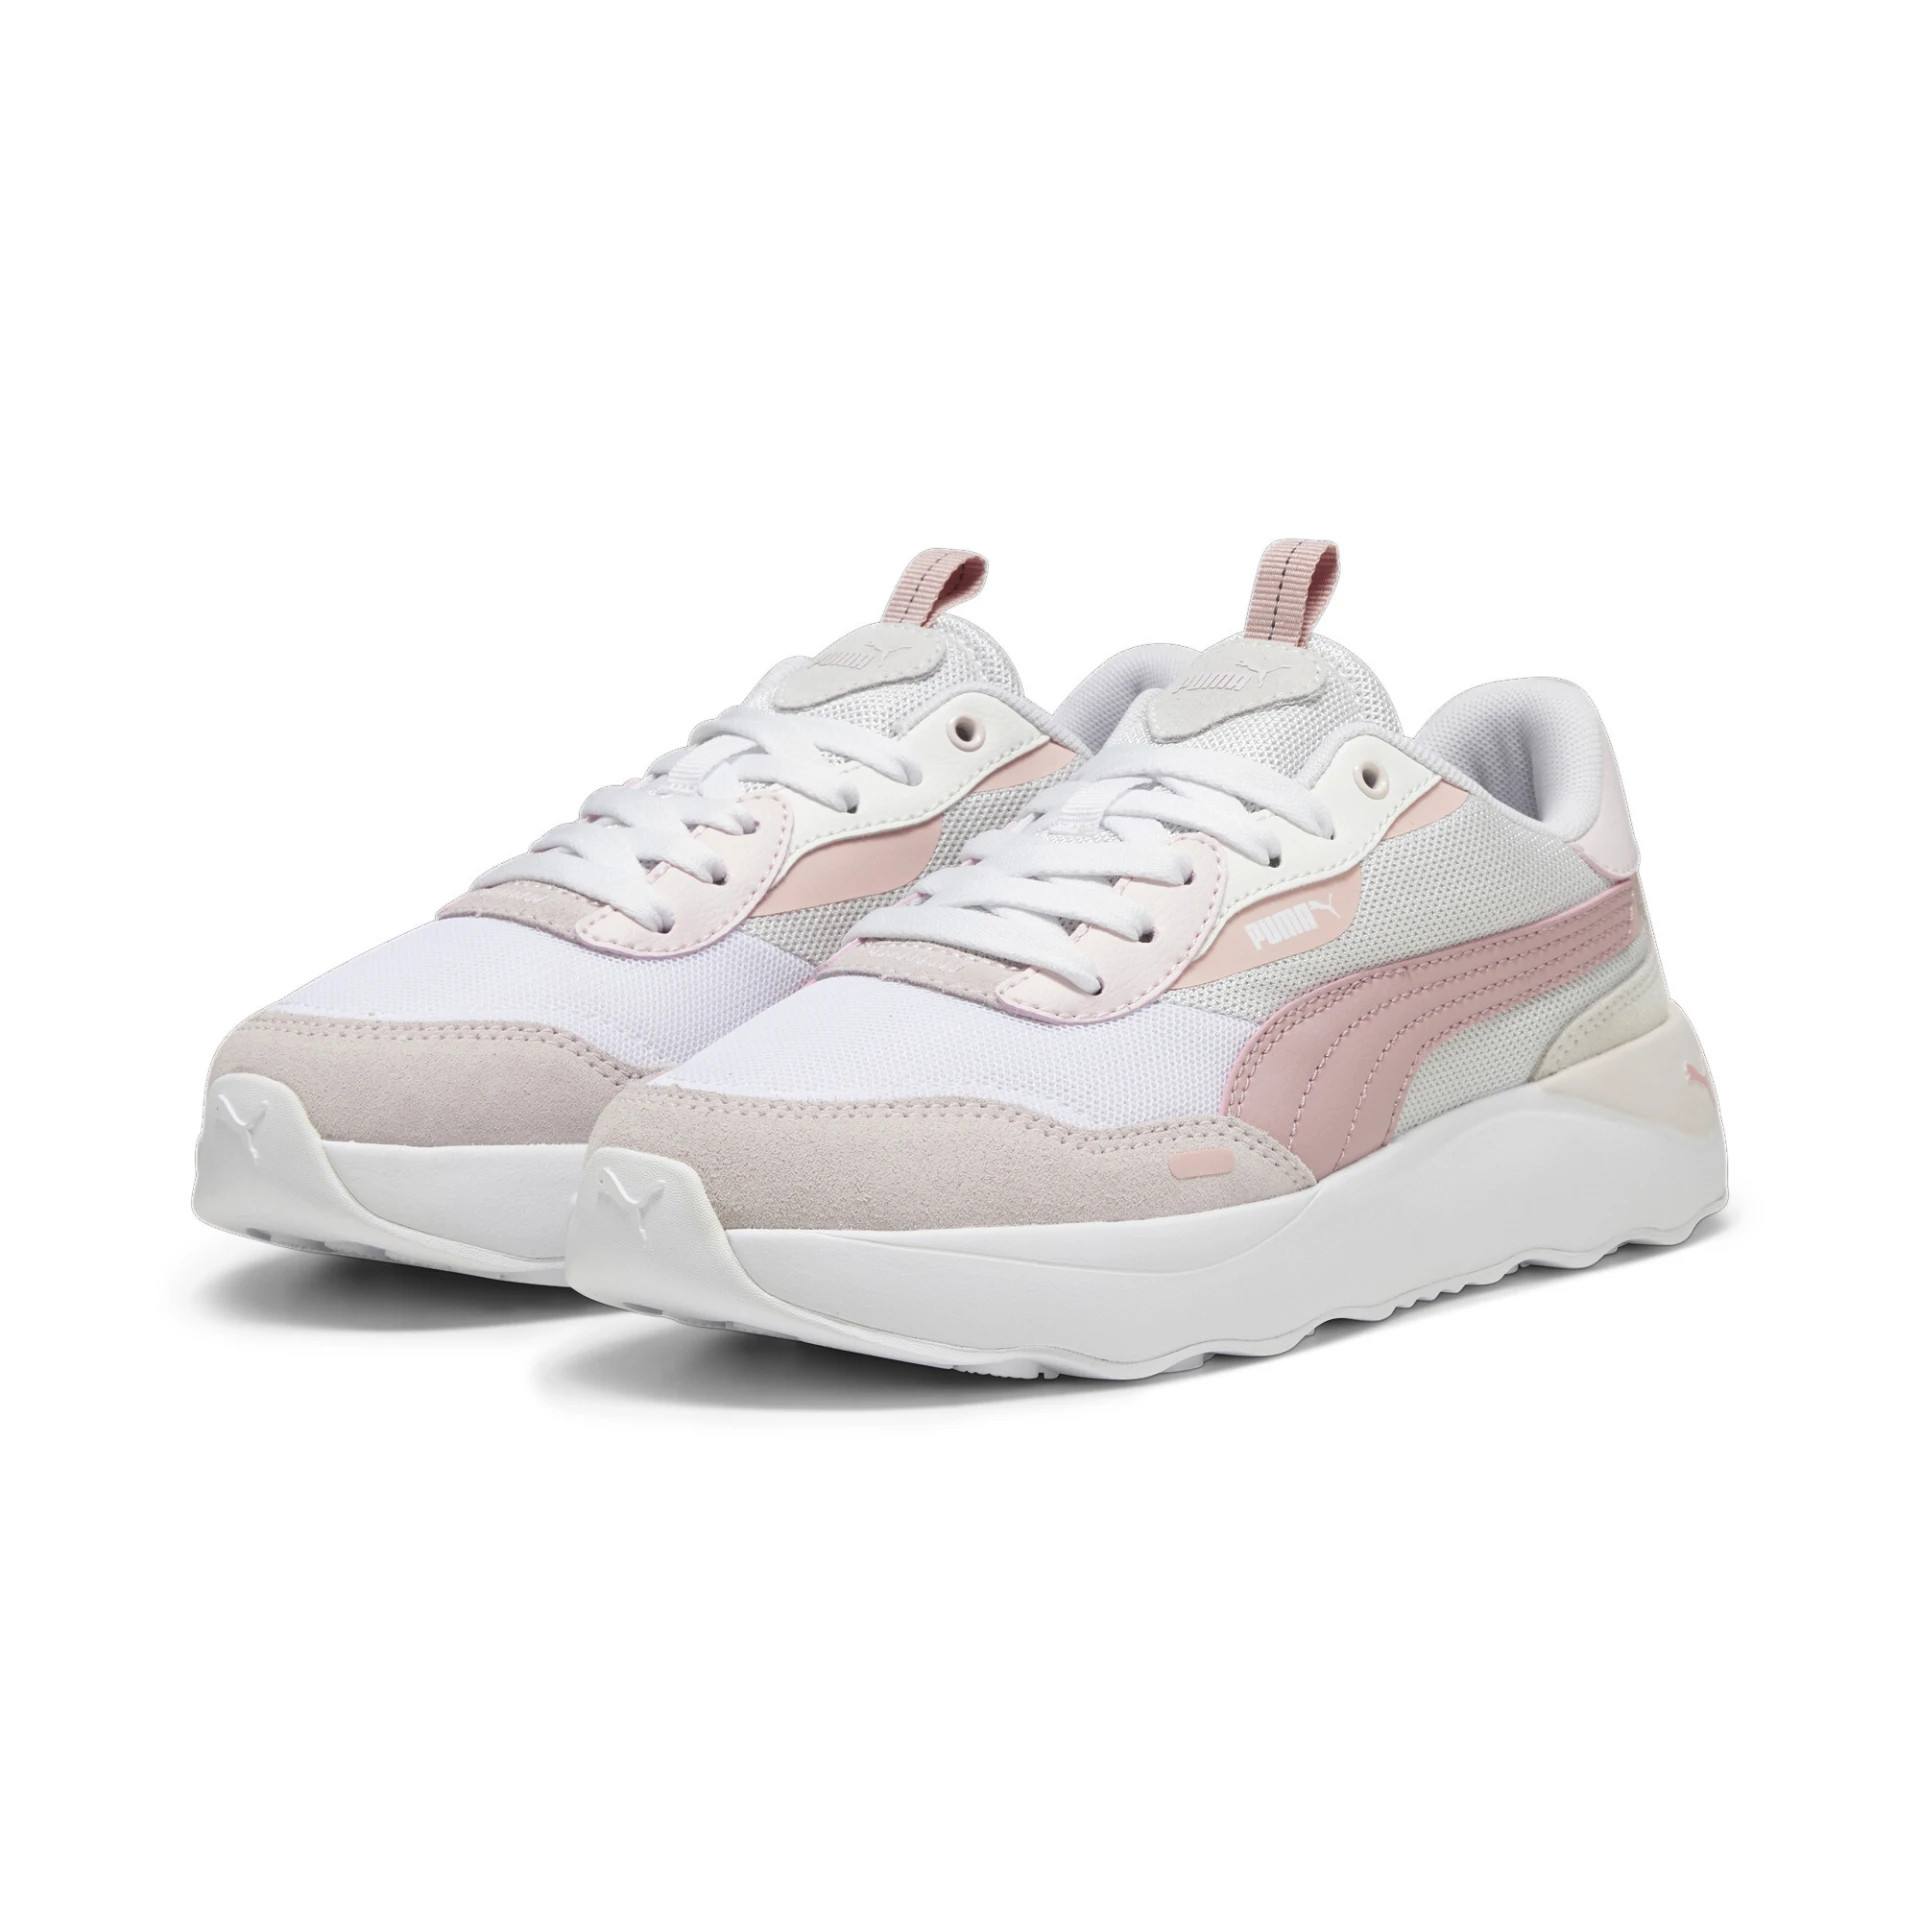 004 FEATHER GRAY-FUTURE PINK-P